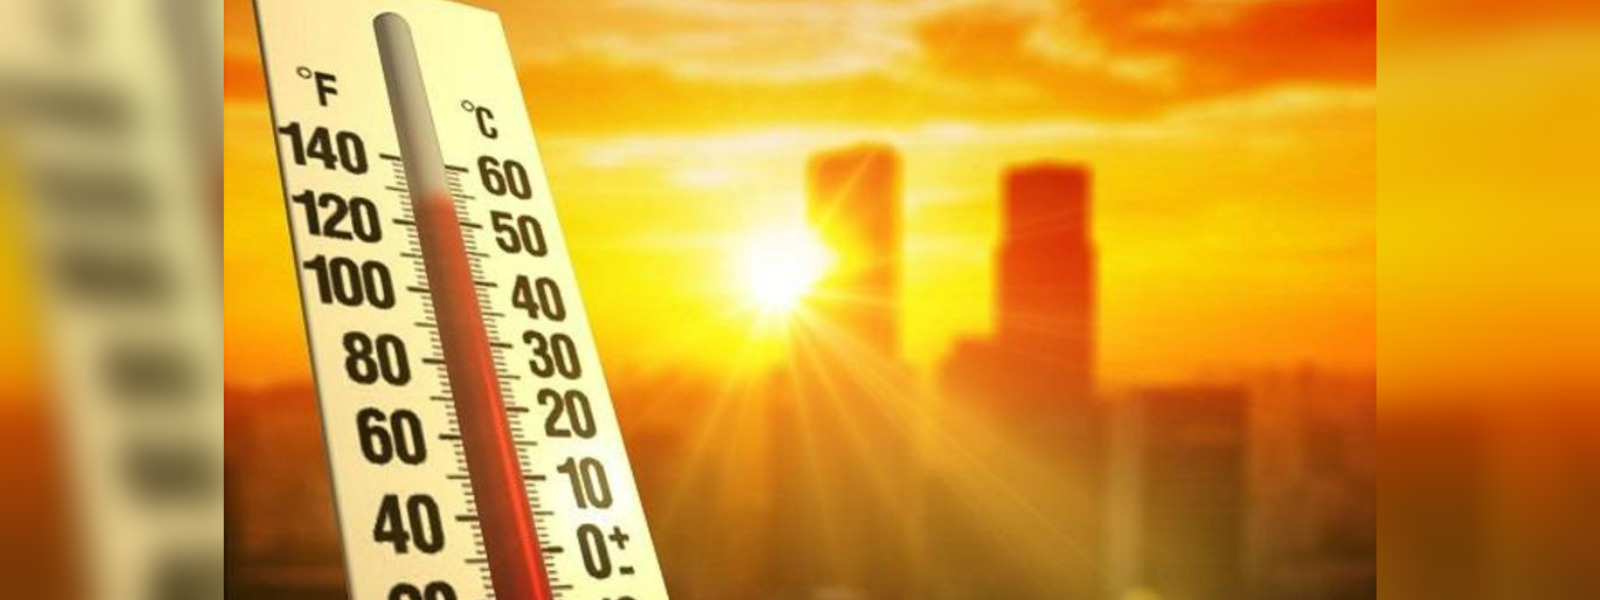 Heat advisory issued for 4 districts